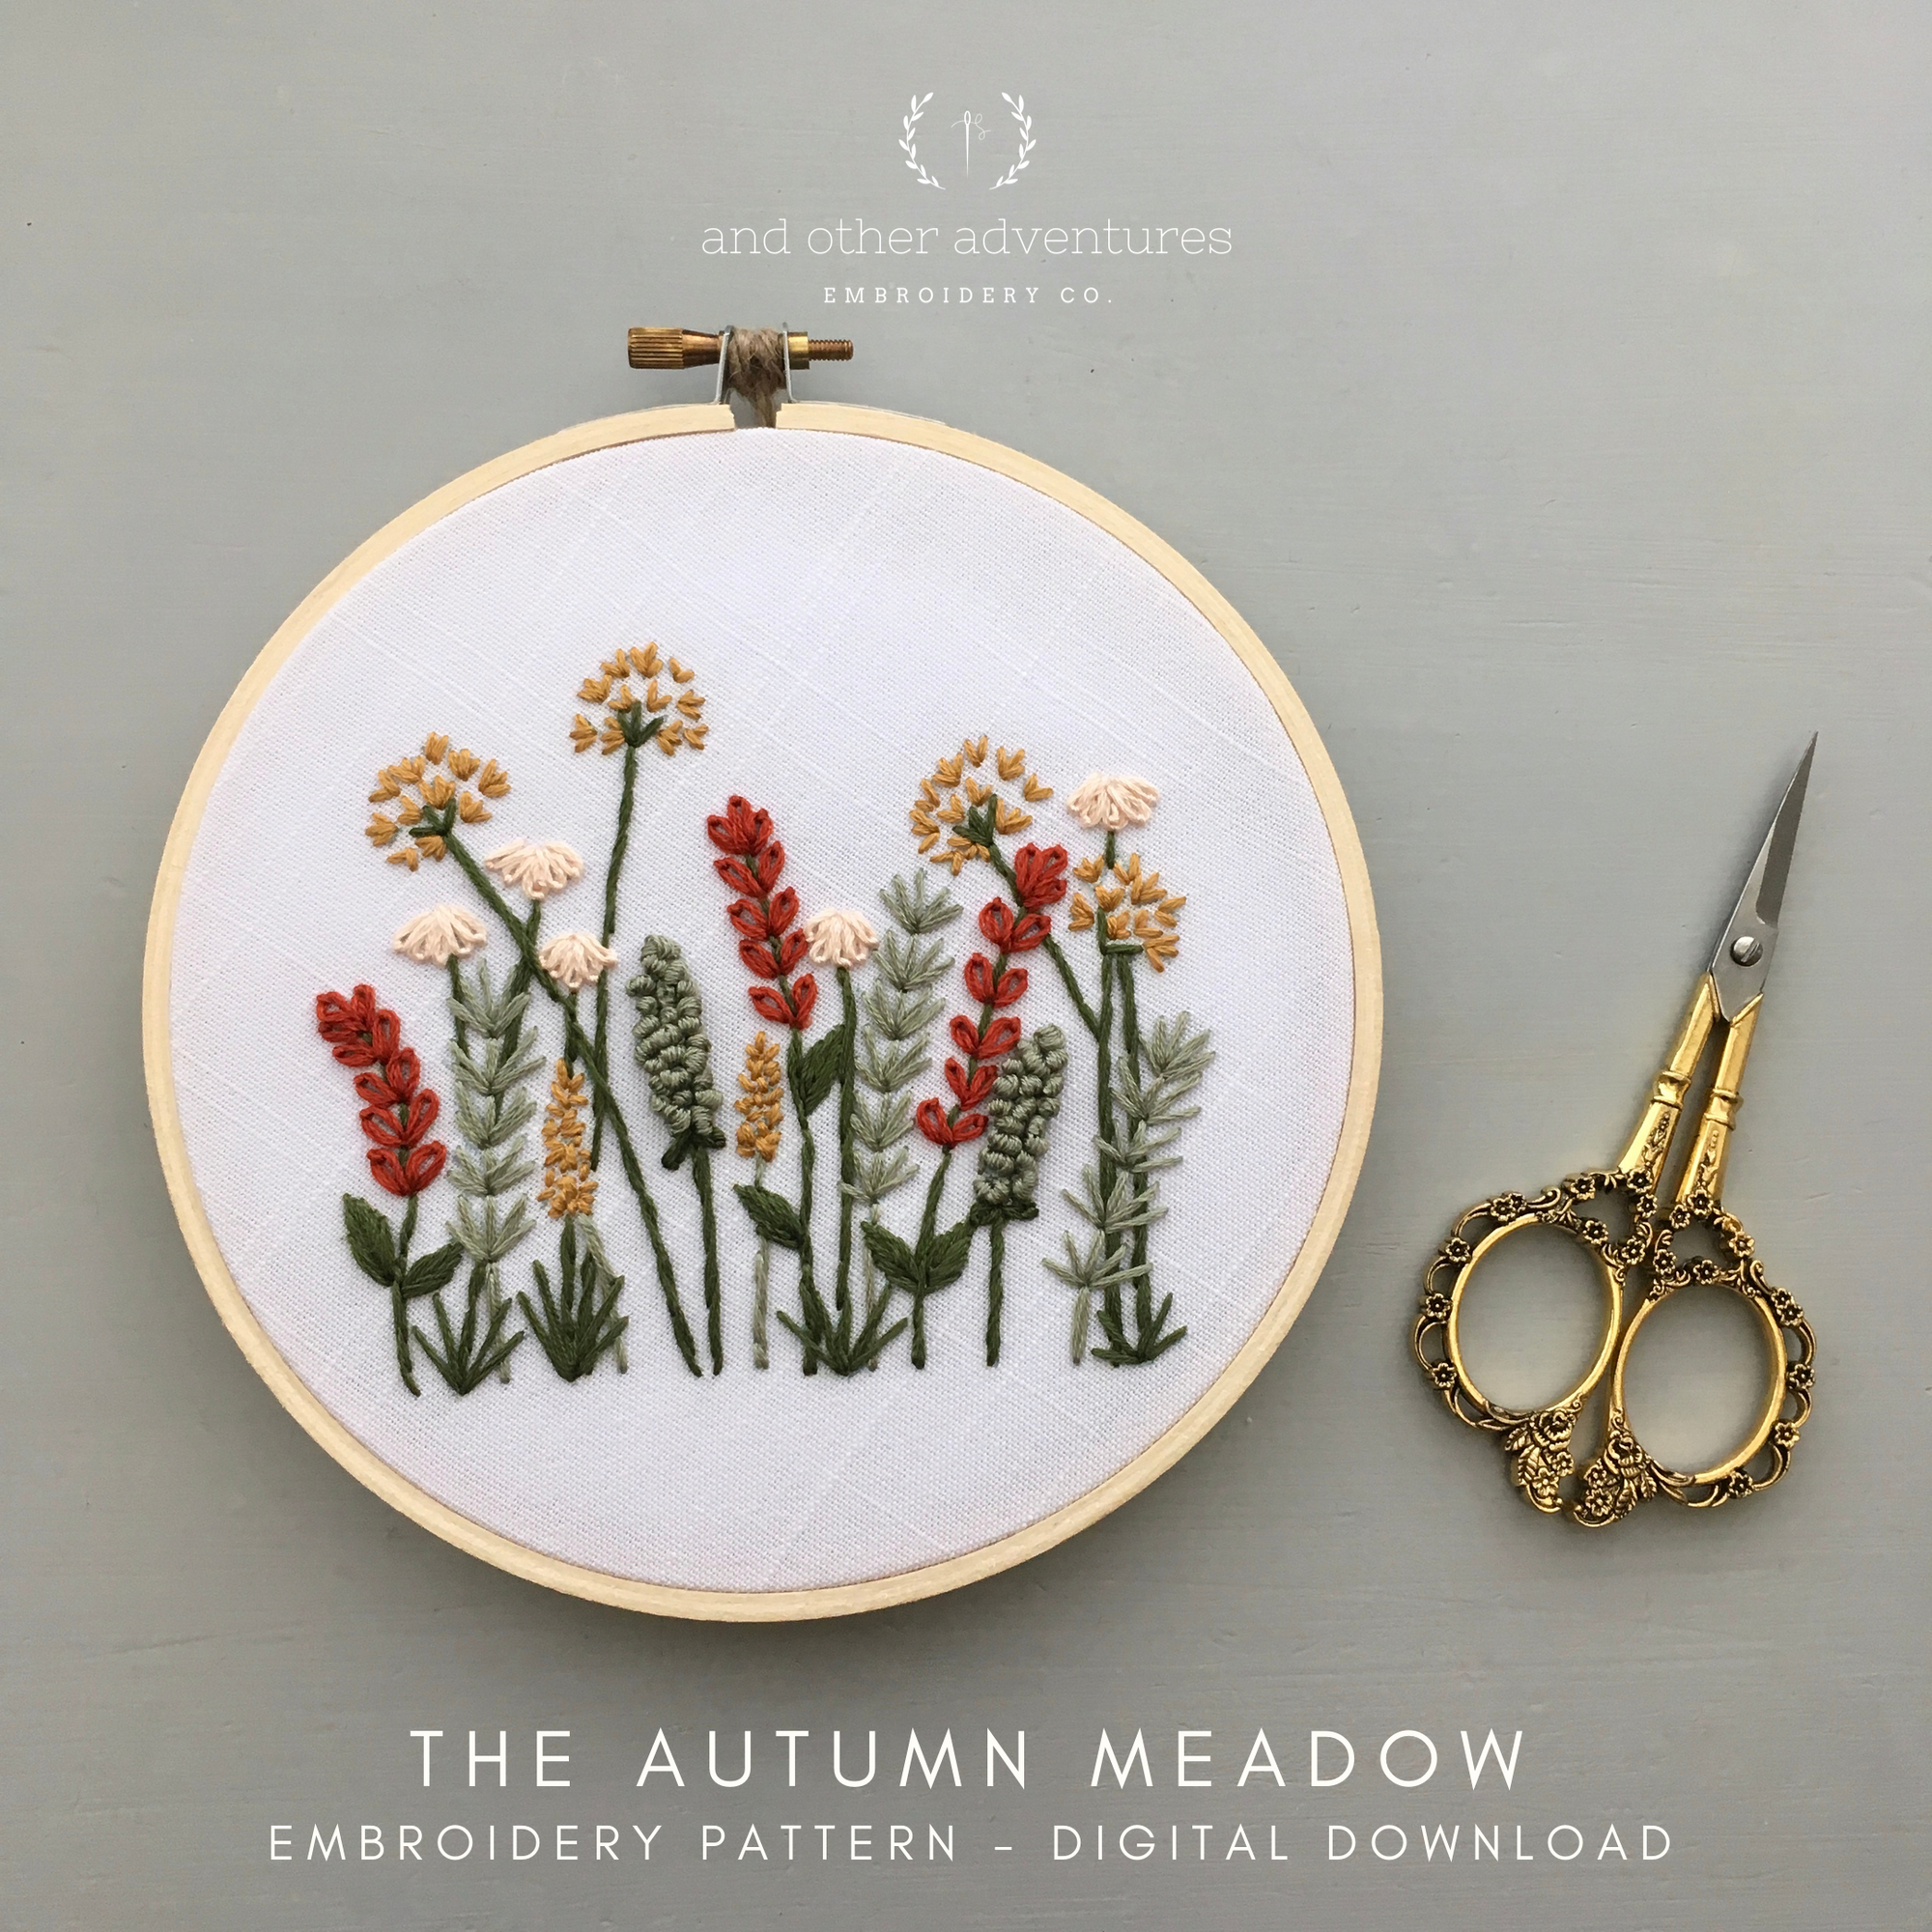 Beginner Hand Embroidery Pattern - Autumn Meadow by And Other Adventures Embroidery Co